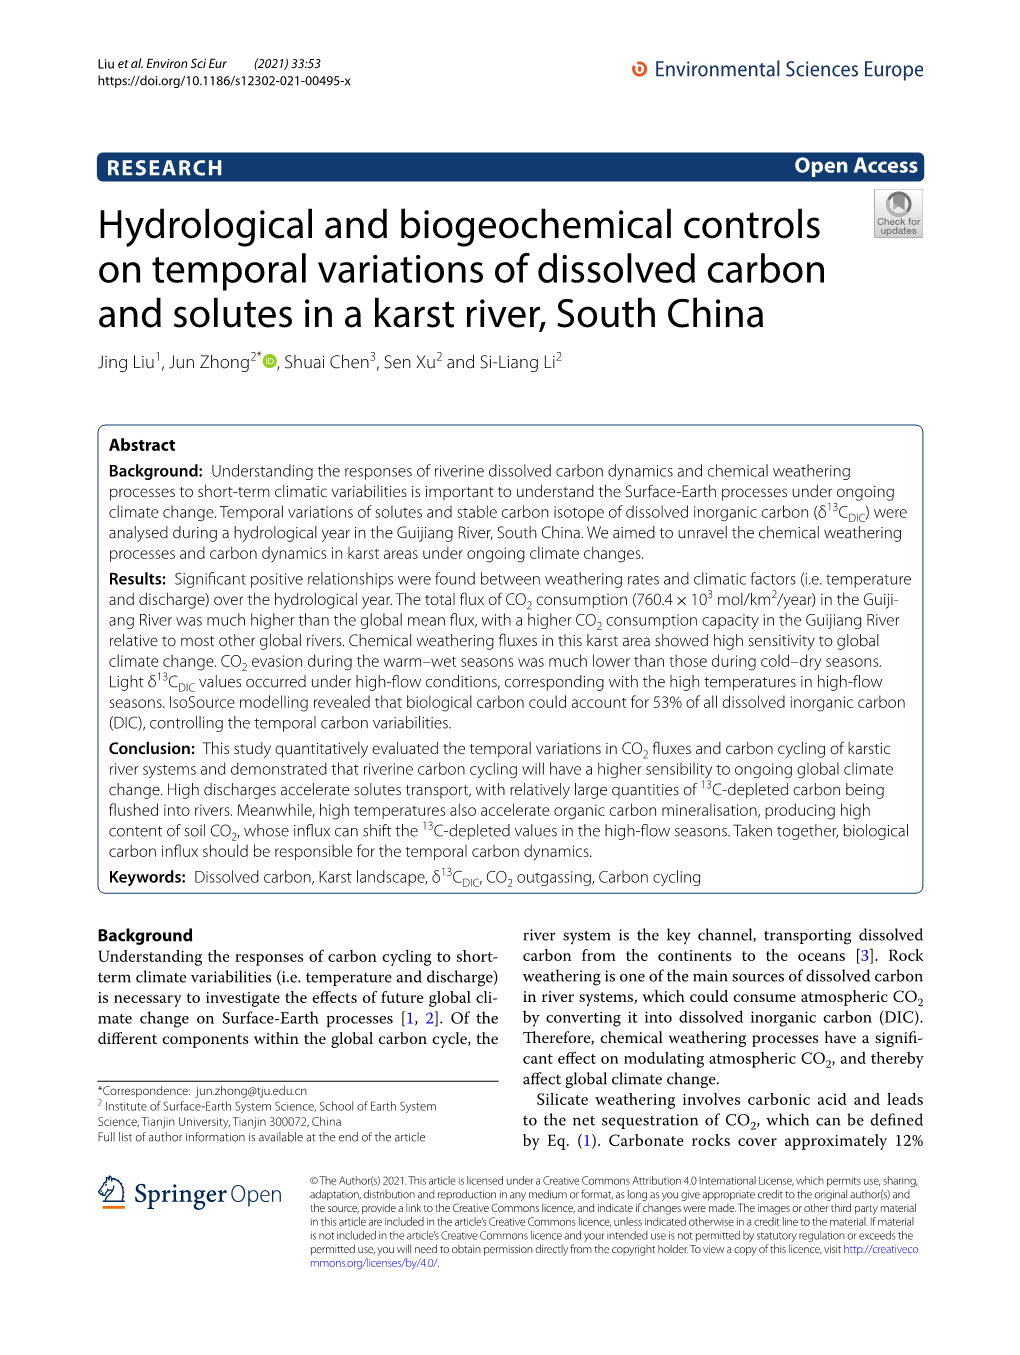 Hydrological and Biogeochemical Controls on Temporal Variations Of